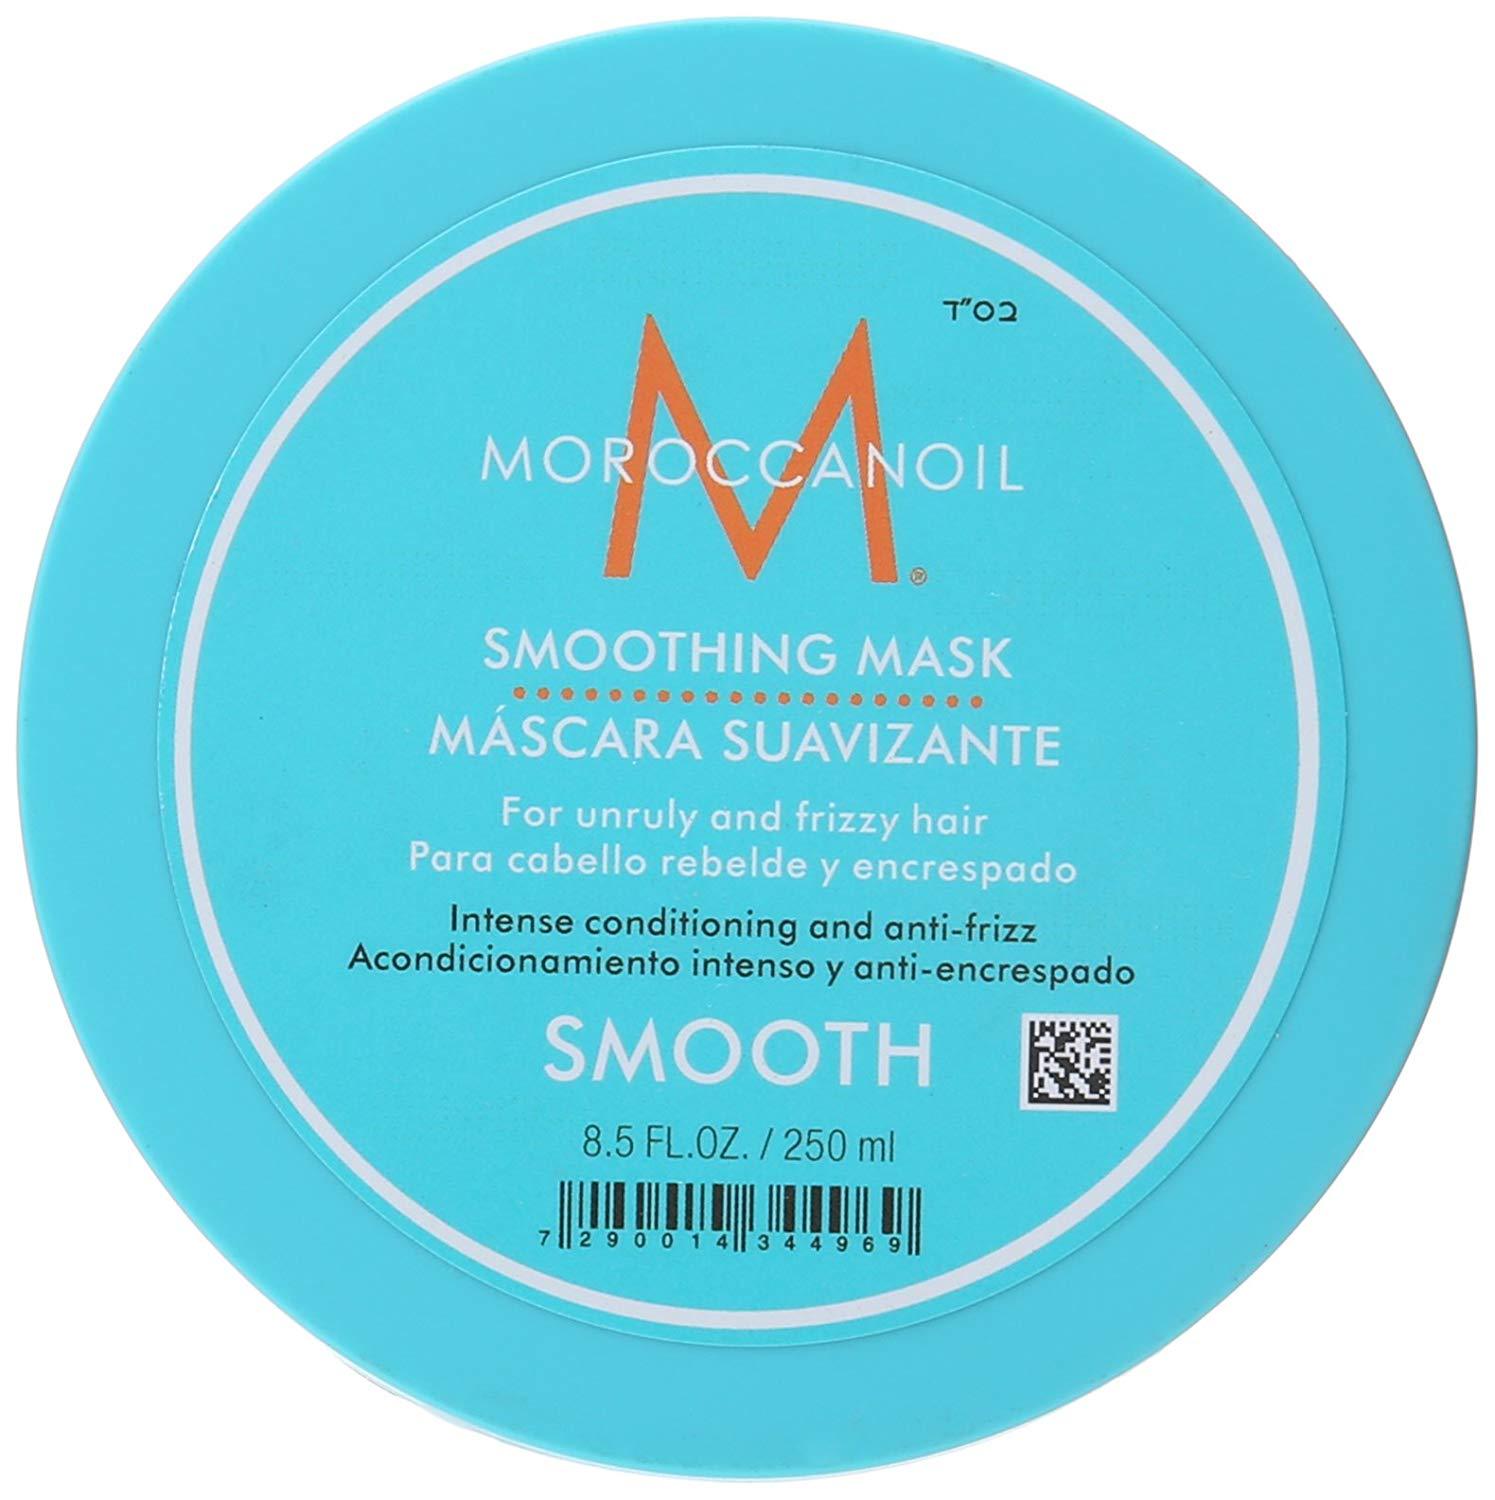 MoroccanOil Smooth Smoothing Mask 8.5oz